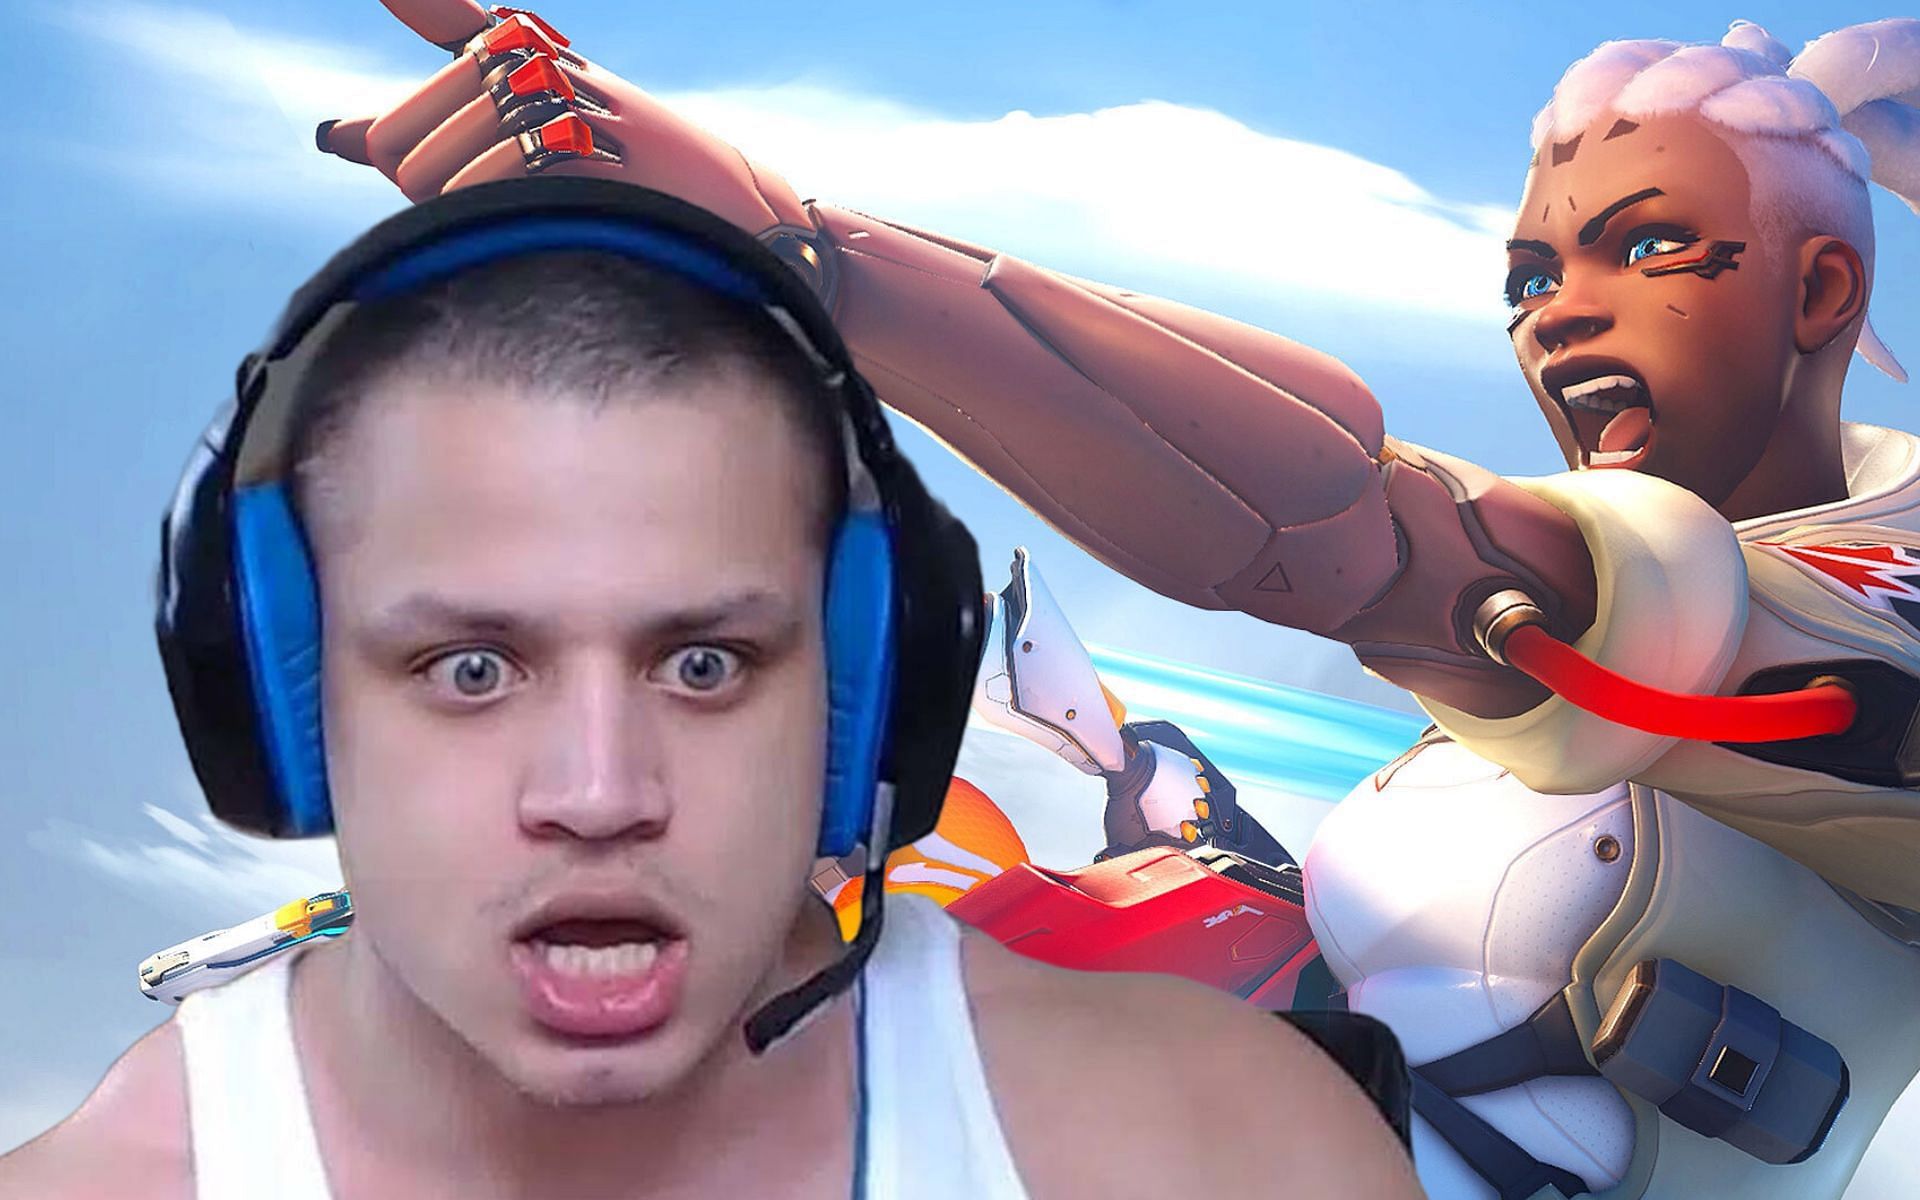 Tyler1 gets featured on the Overwatch subreddit, and reacts to it live on stream (Image via Sportskeeda)